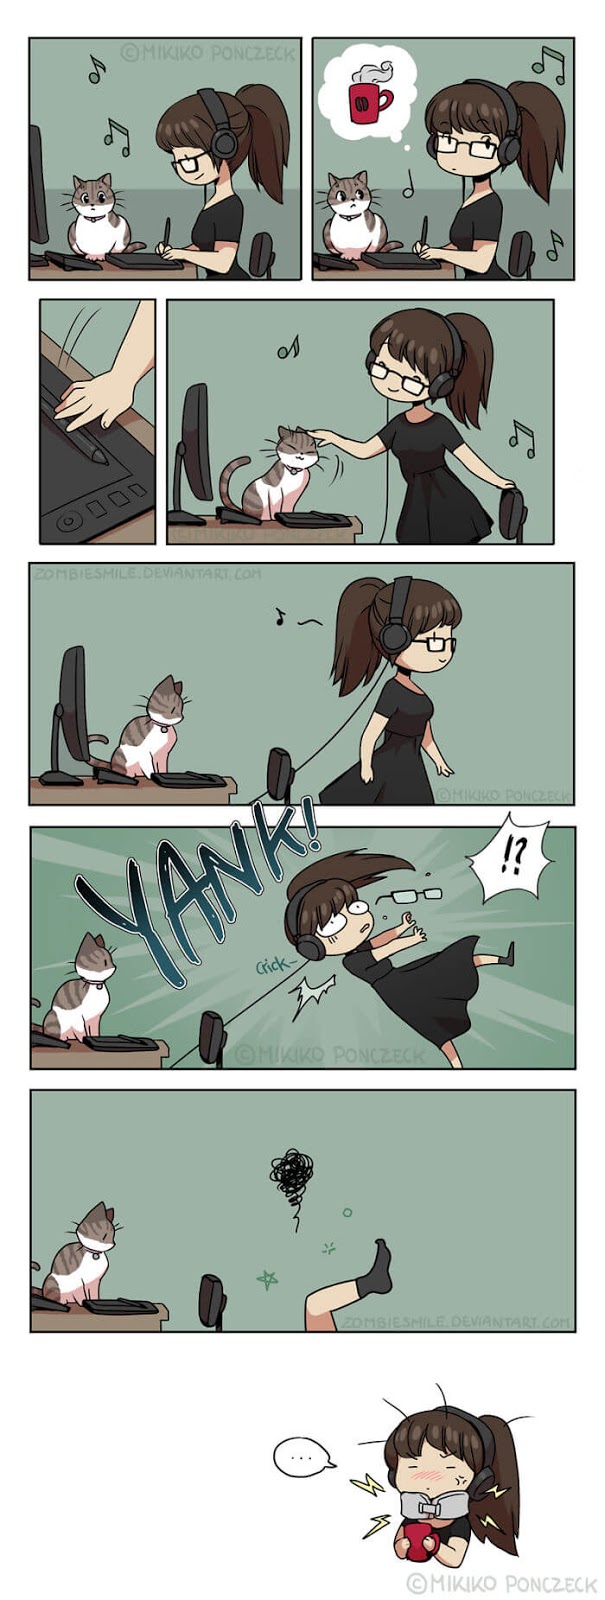 Artist Illustrates Cute Comics About Her Daily Life With Her Partner And Cat